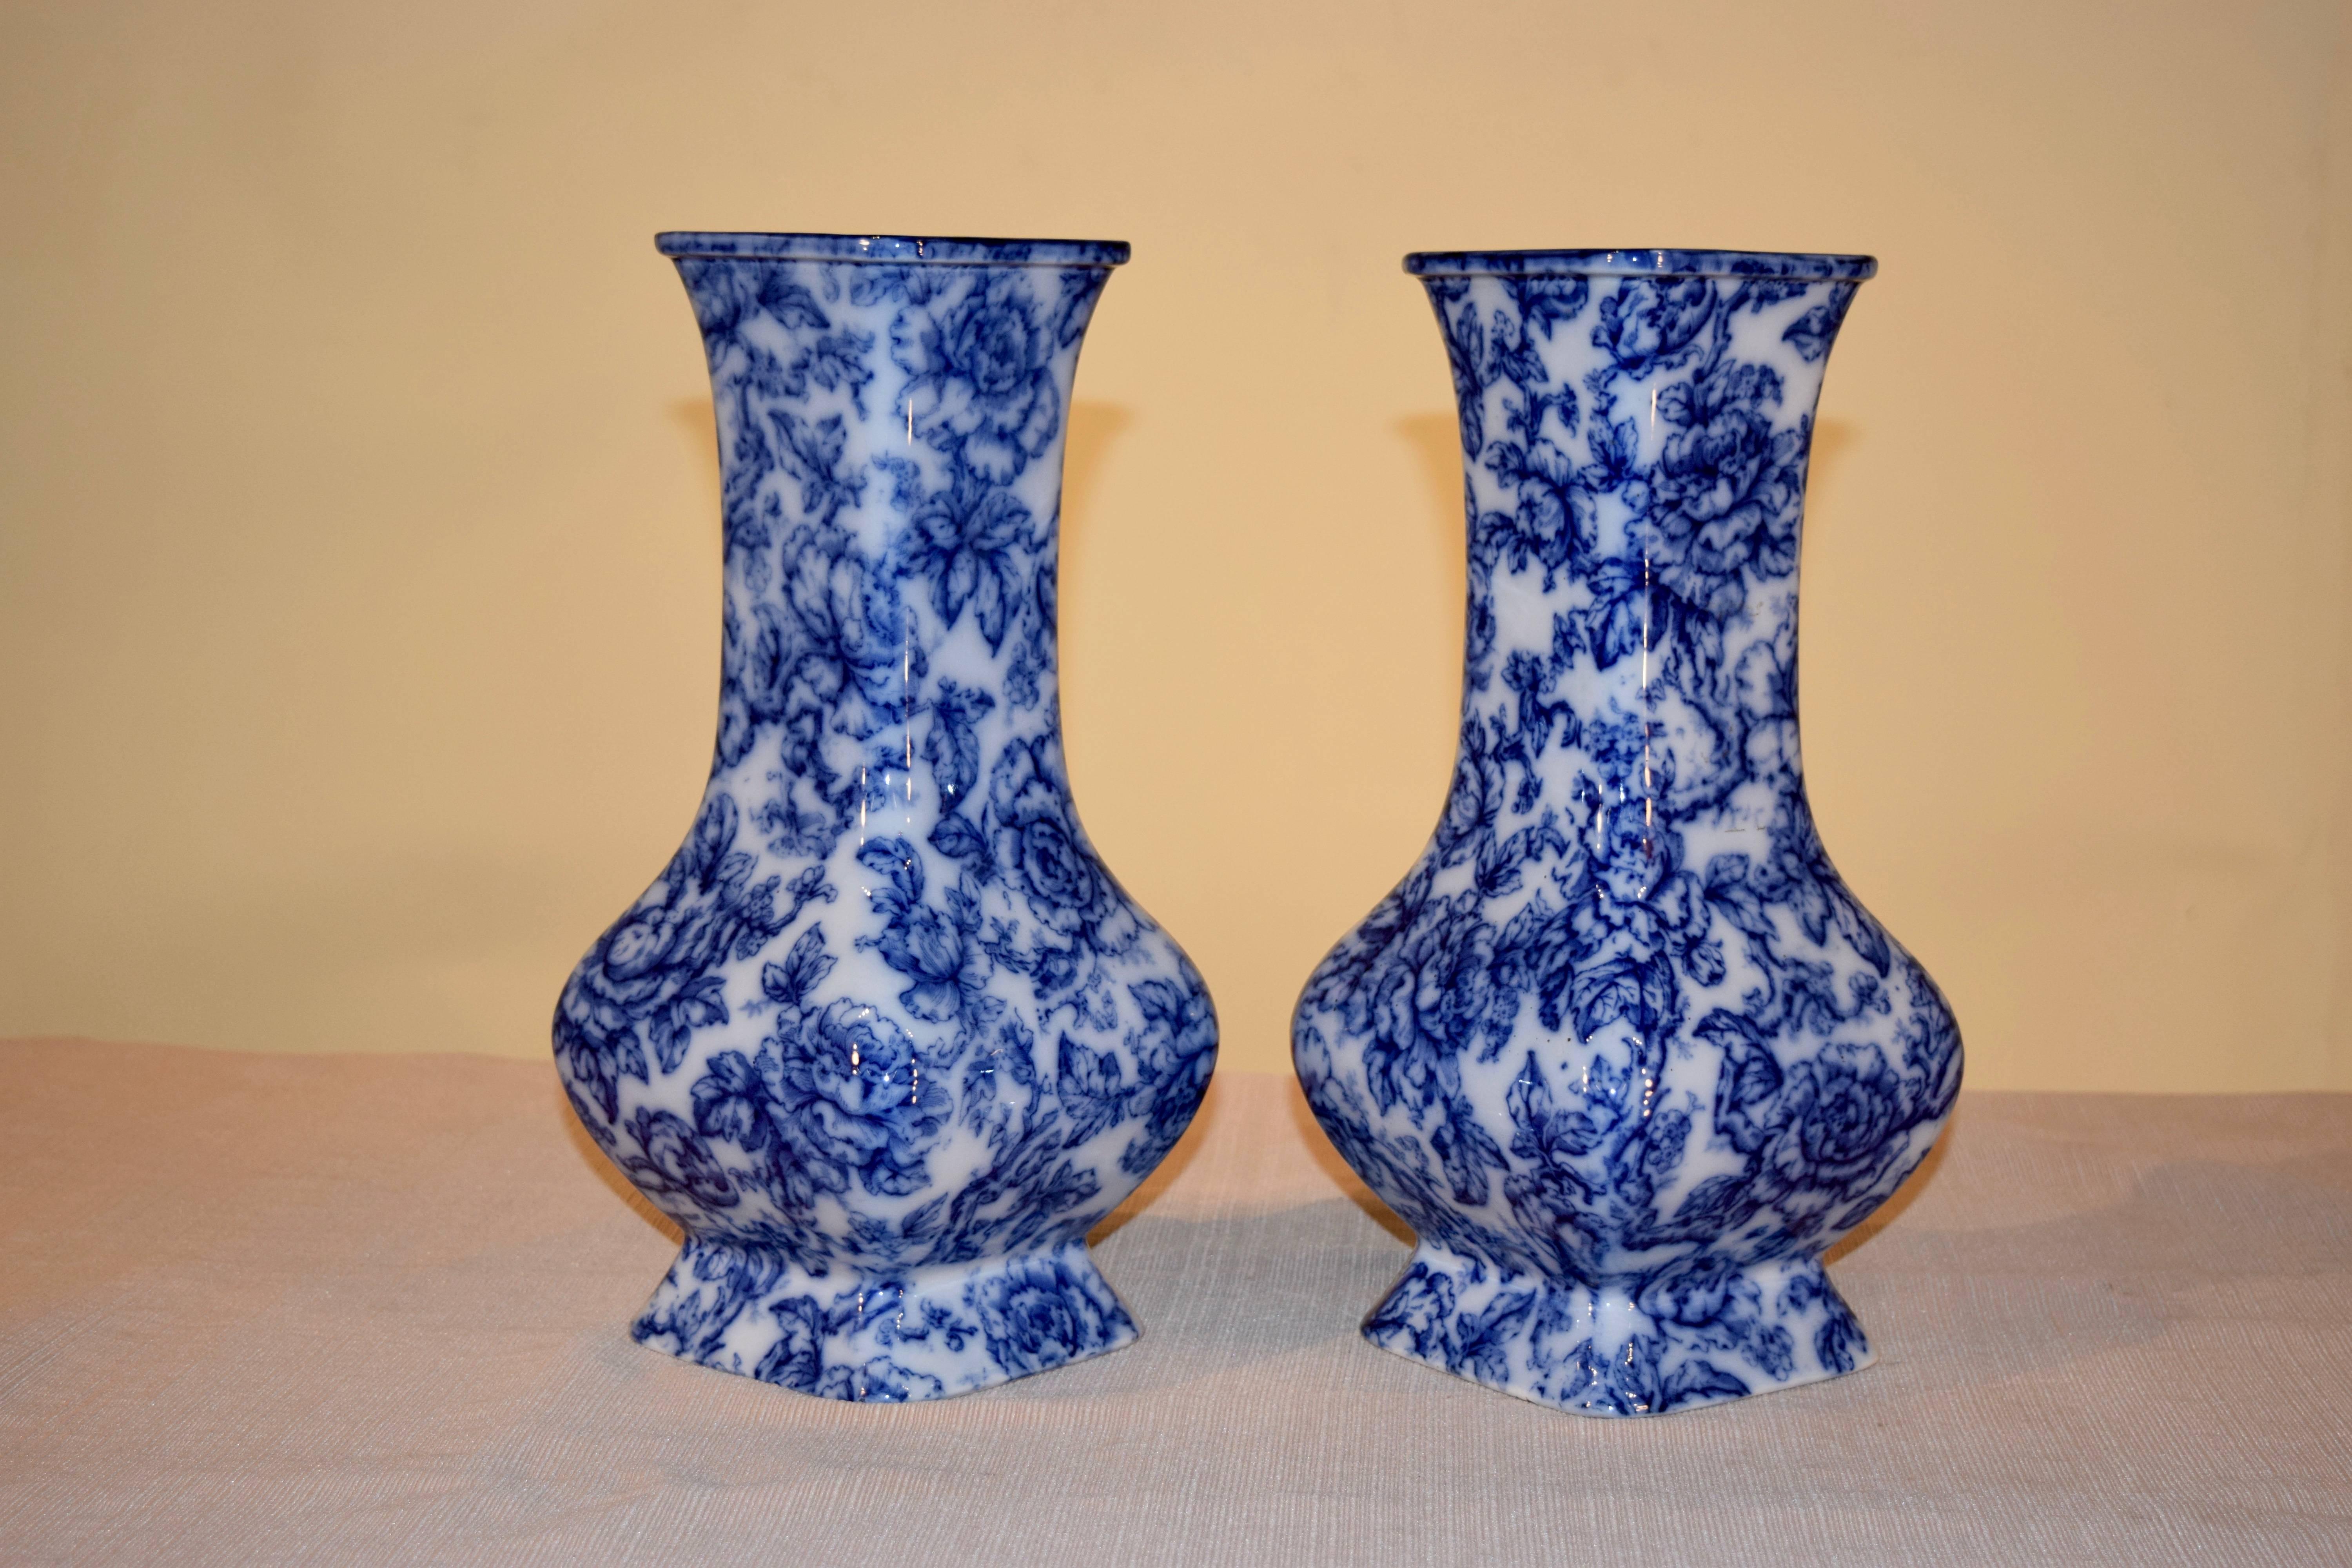 19th century pair of Staffordshire vases in the 